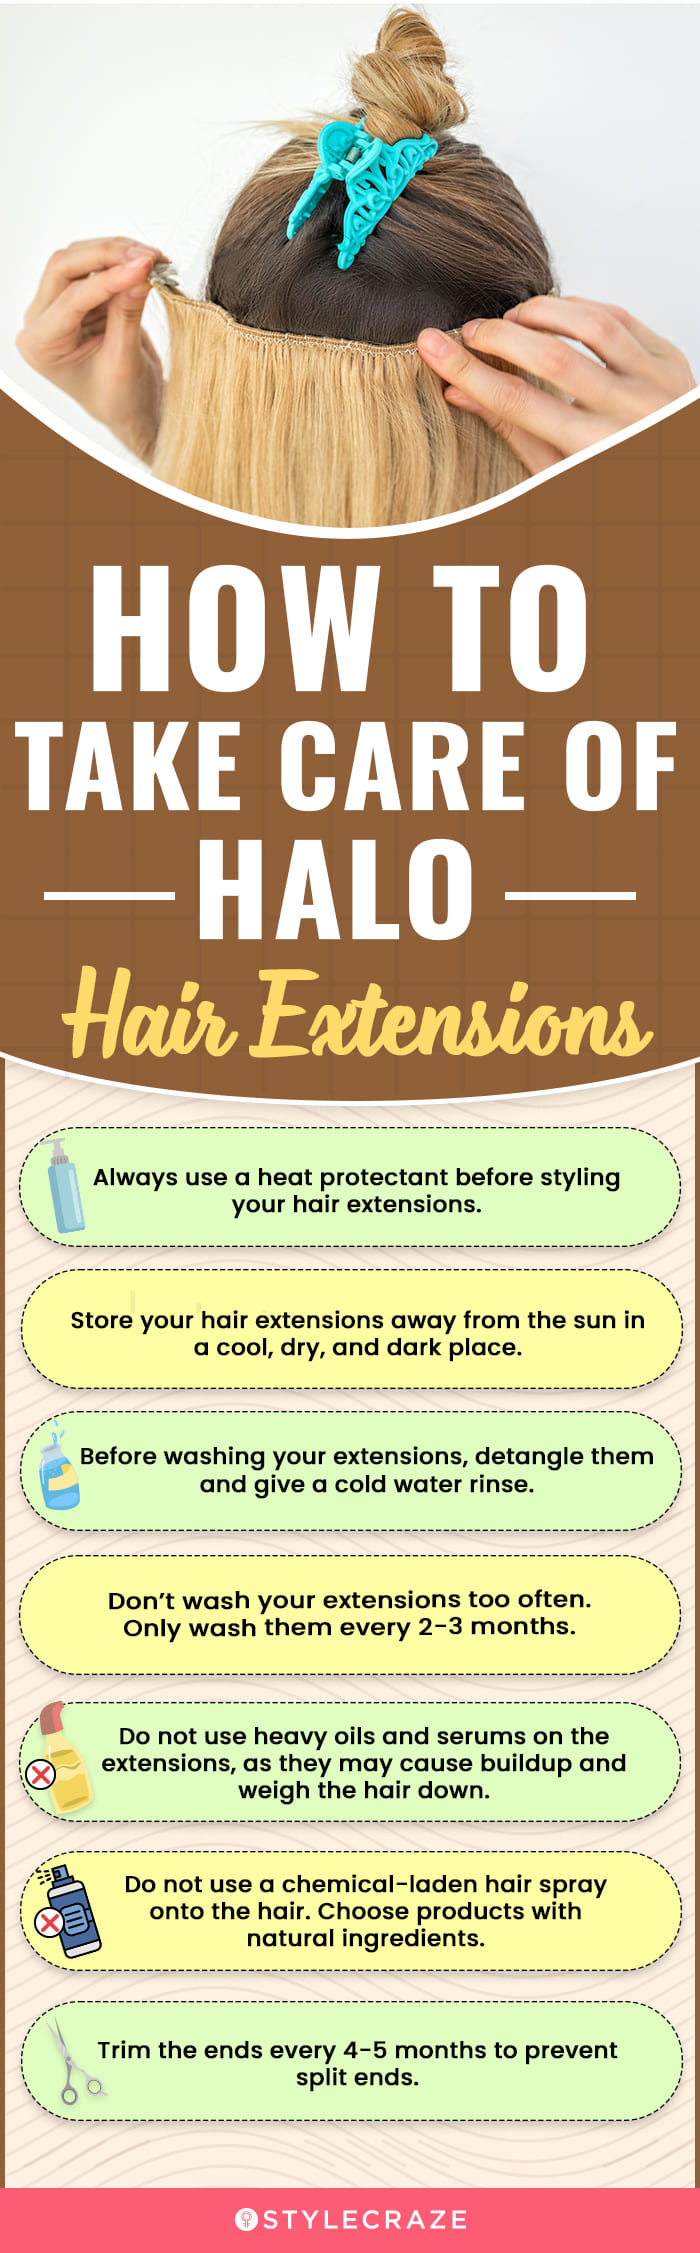 How To Take Care Of Halo Hair Extensions [infographic]